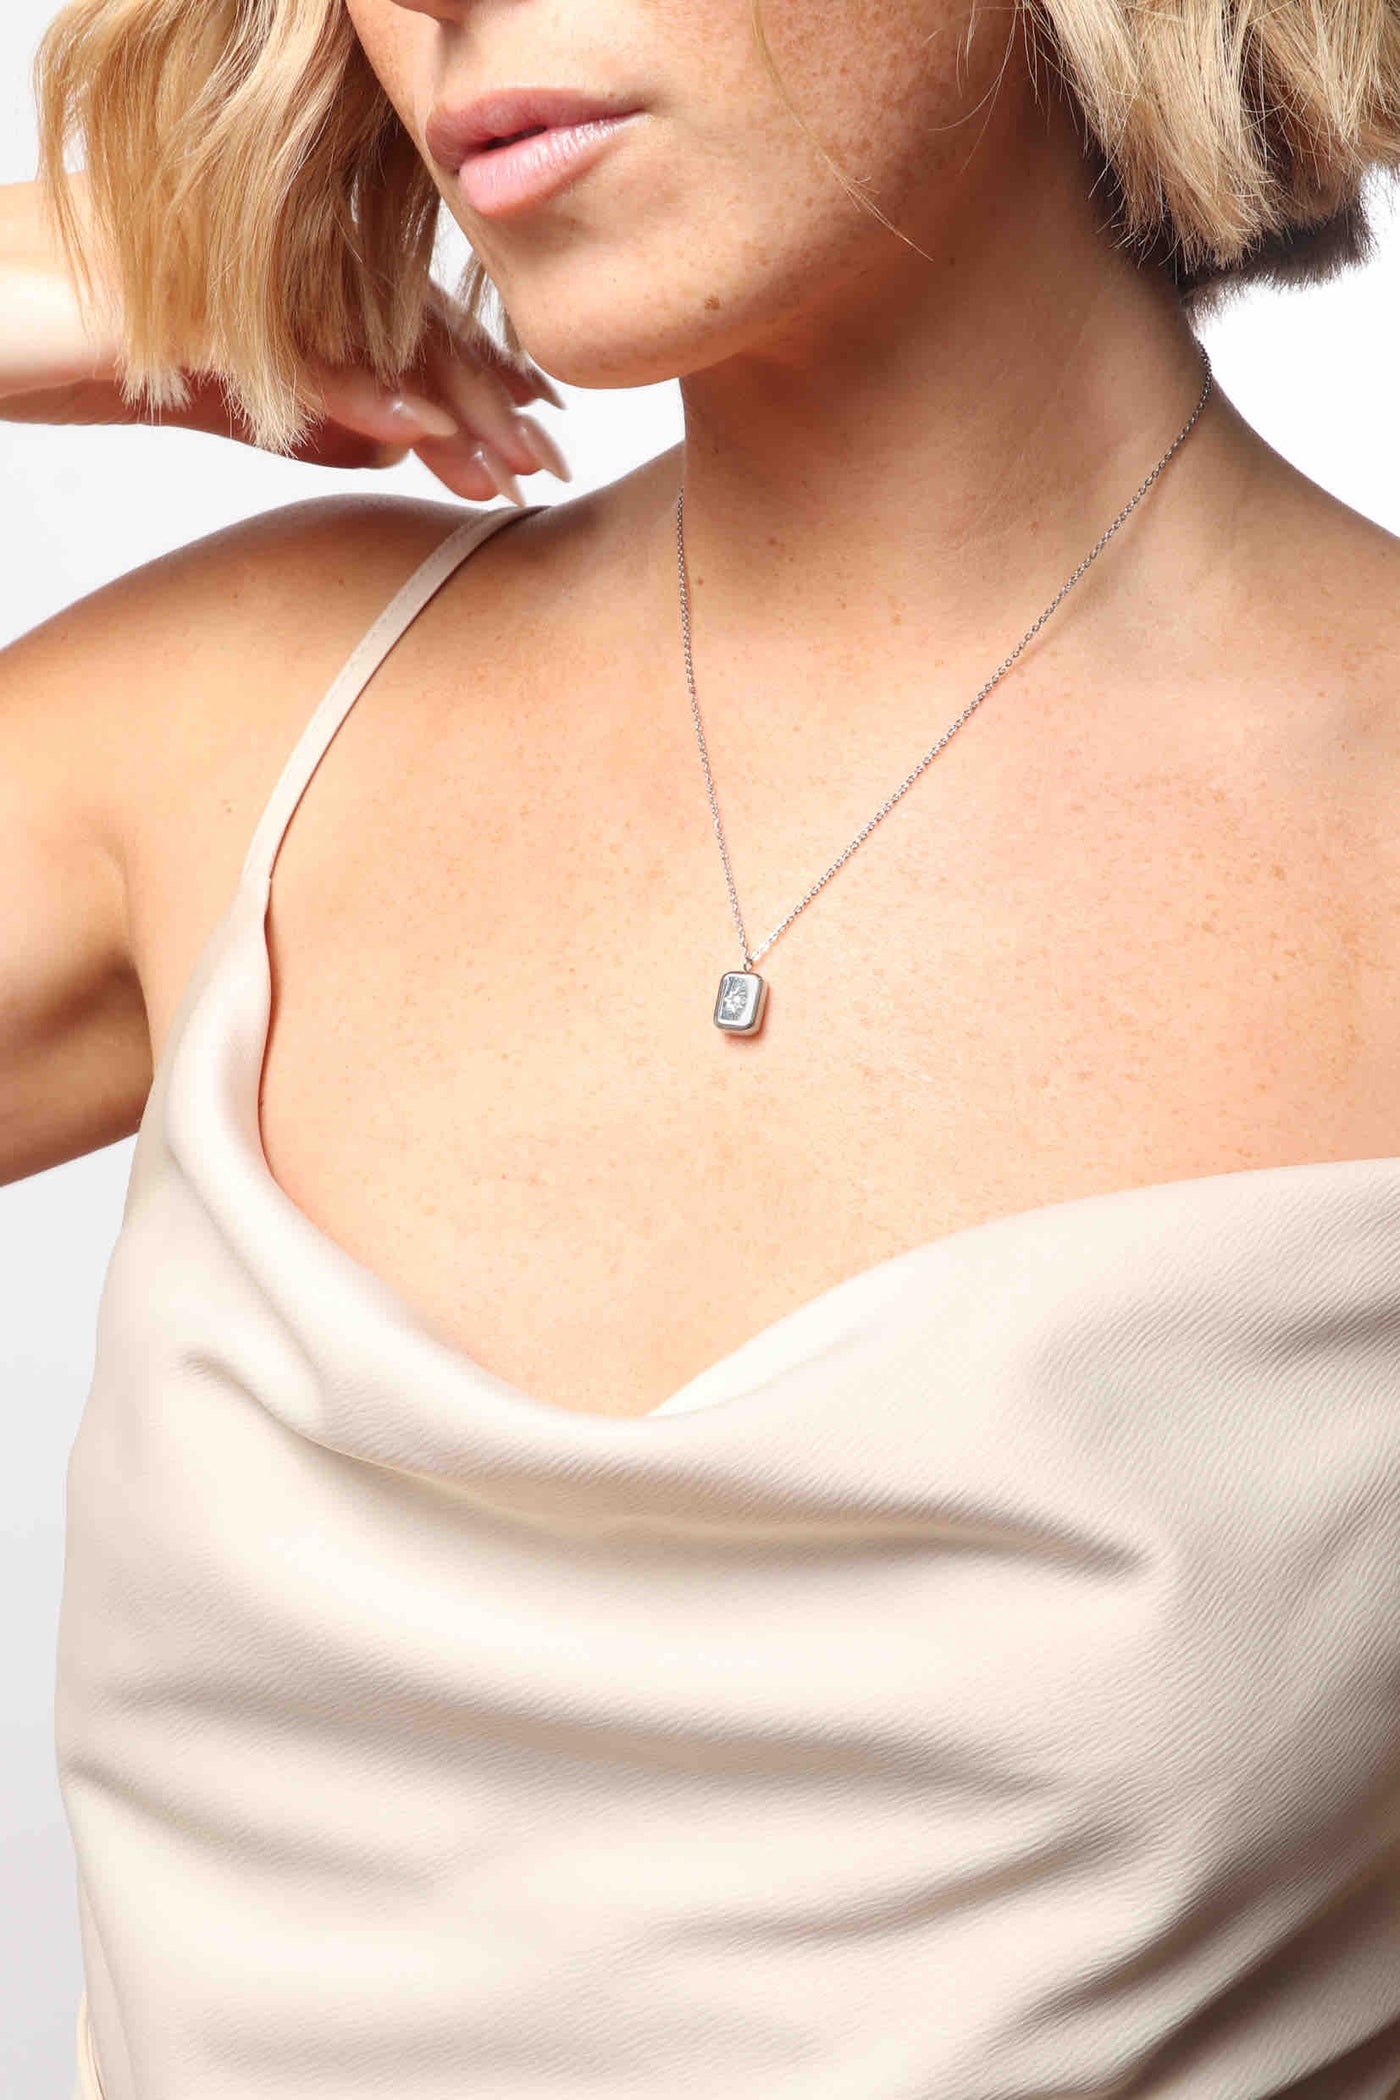 Marrin Costello wearing Marrin Costello Jewelry Orion Signet Pendant necklace with square pendant. Pendant is engraved with a star and CZ detail with spring ring clasp closure and extender. Waterproof, sustainable, hypoallergenic. Polished stainless steel.